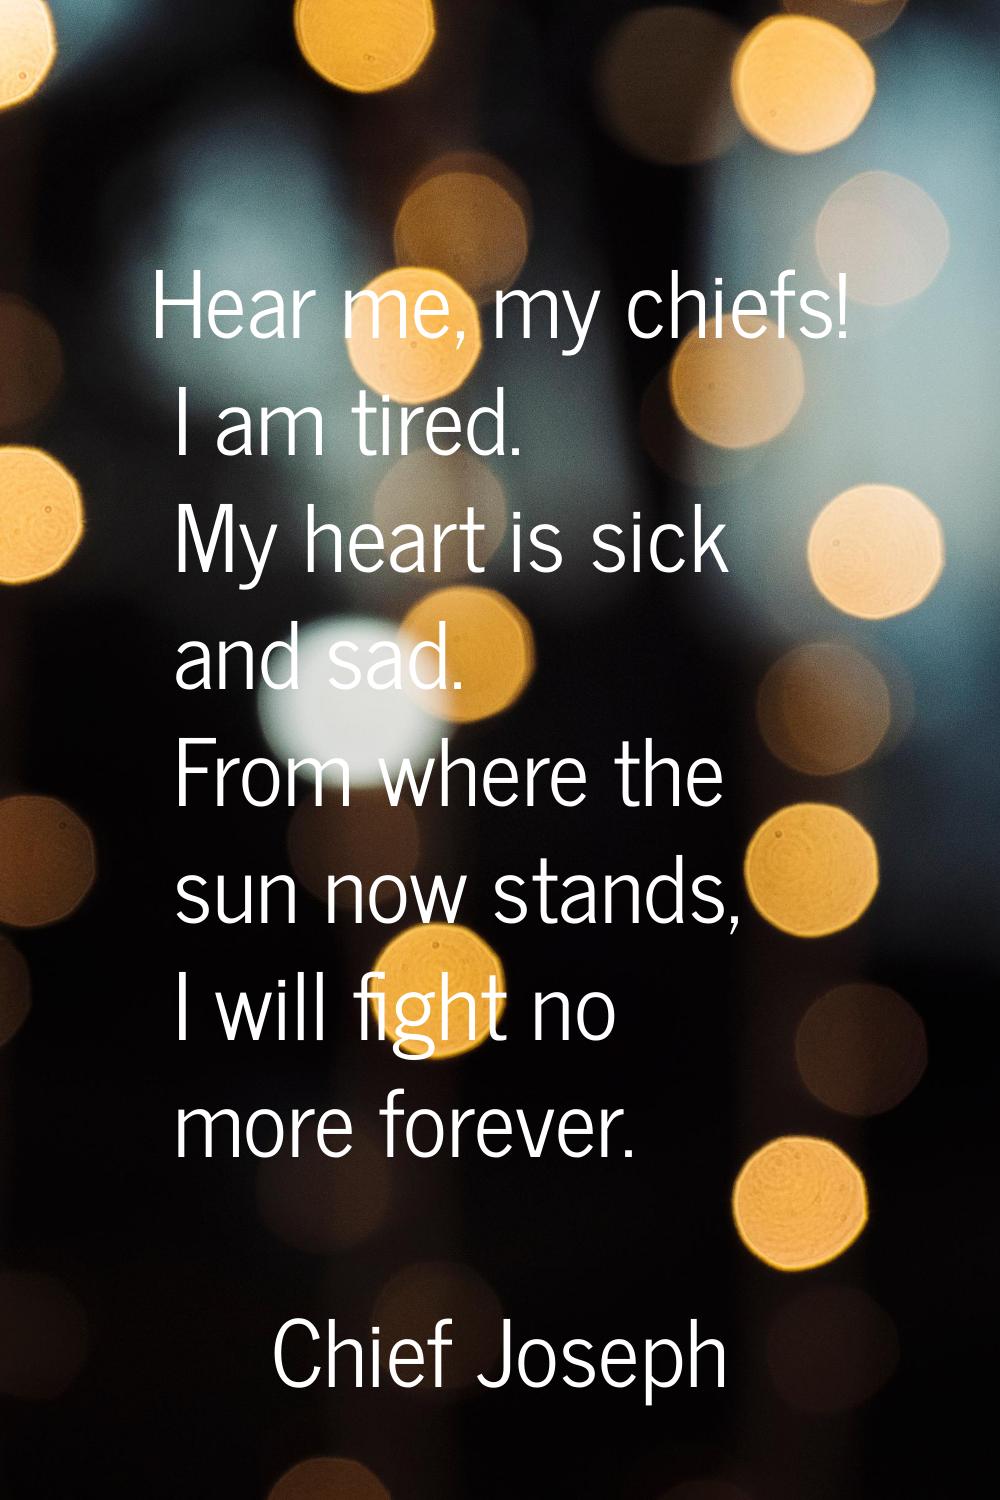 Hear me, my chiefs! I am tired. My heart is sick and sad. From where the sun now stands, I will fig